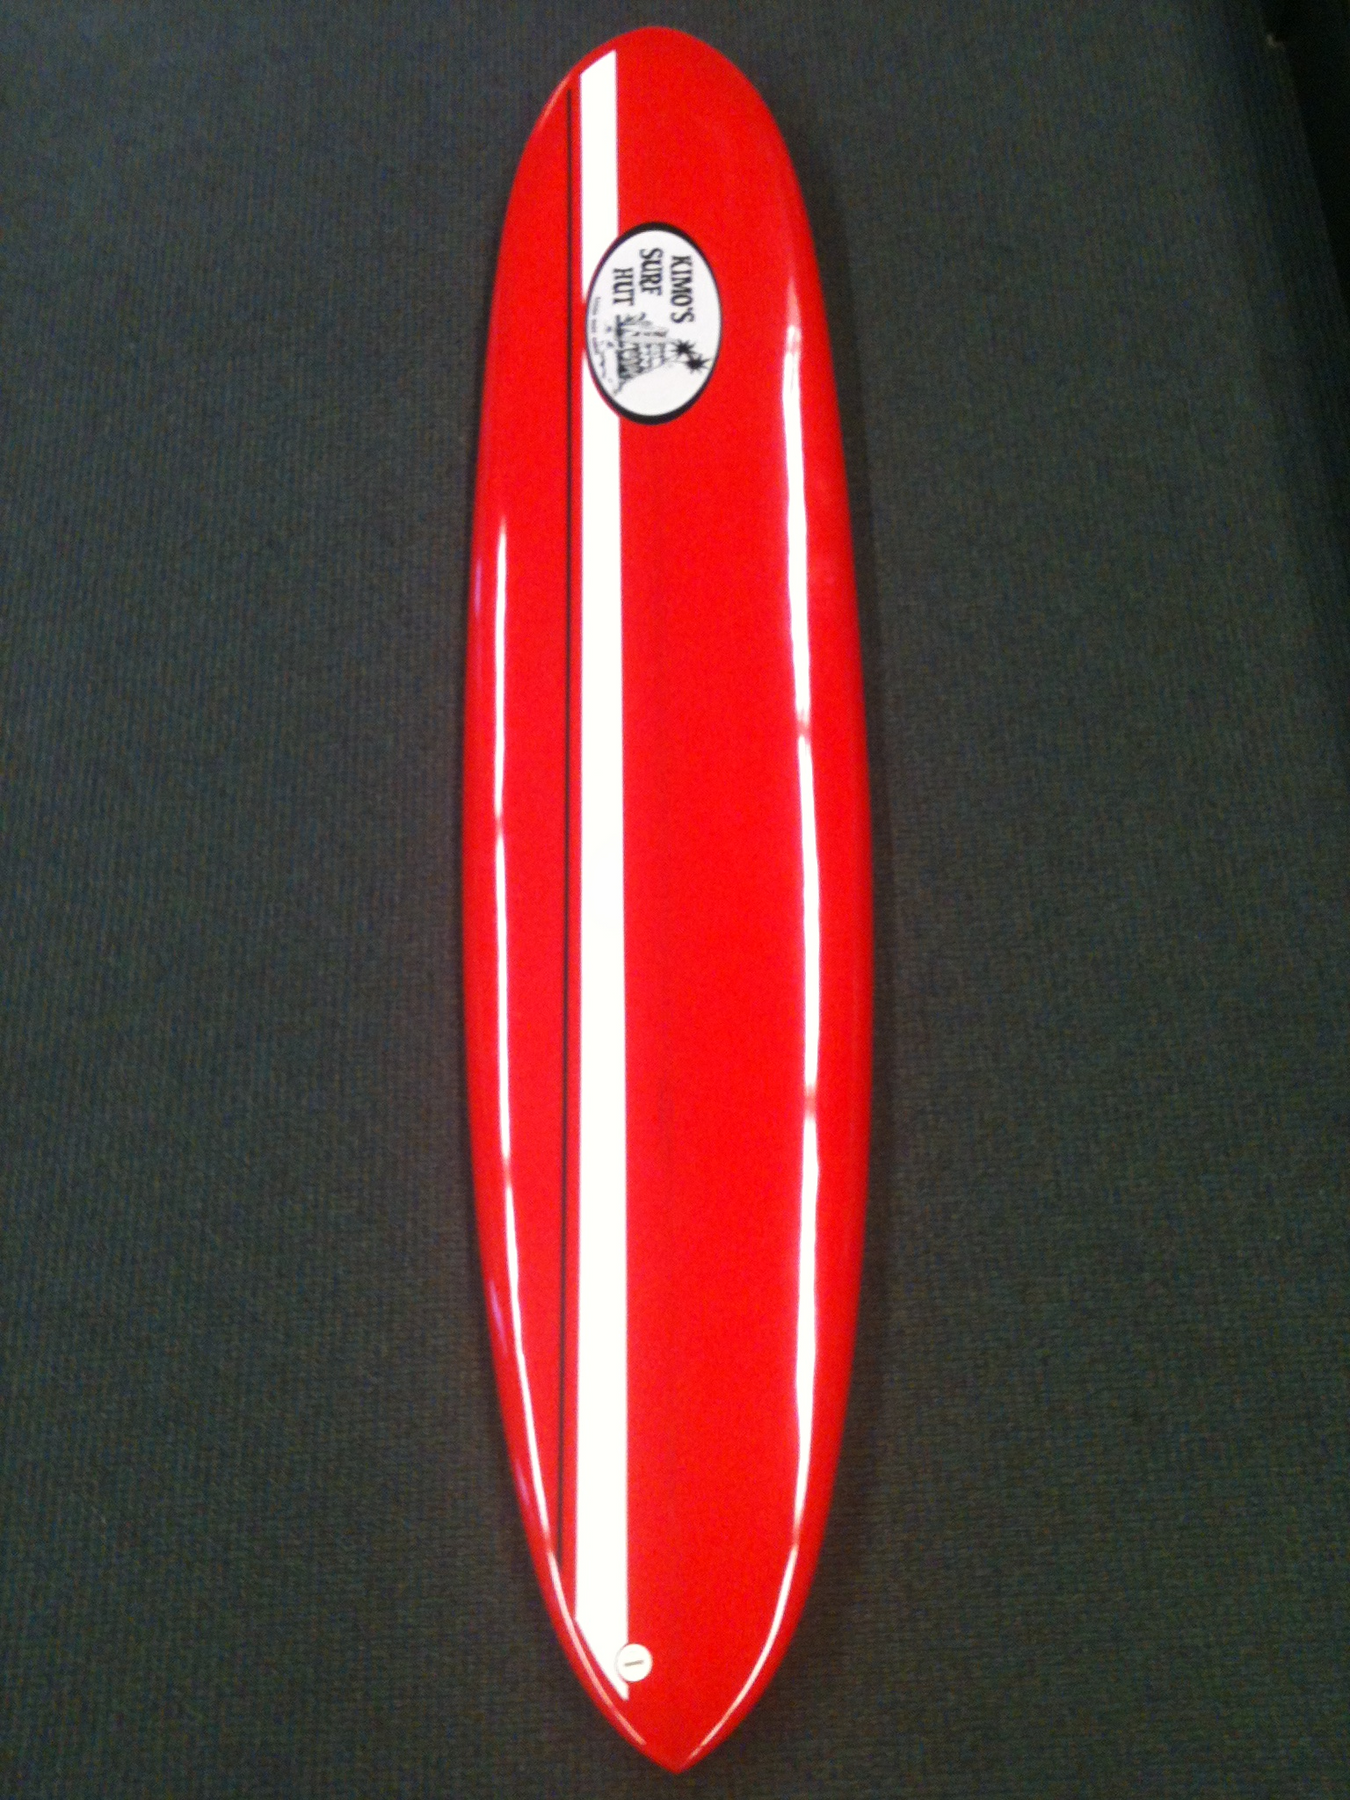 Mid-Length or Fun Size Surfboard